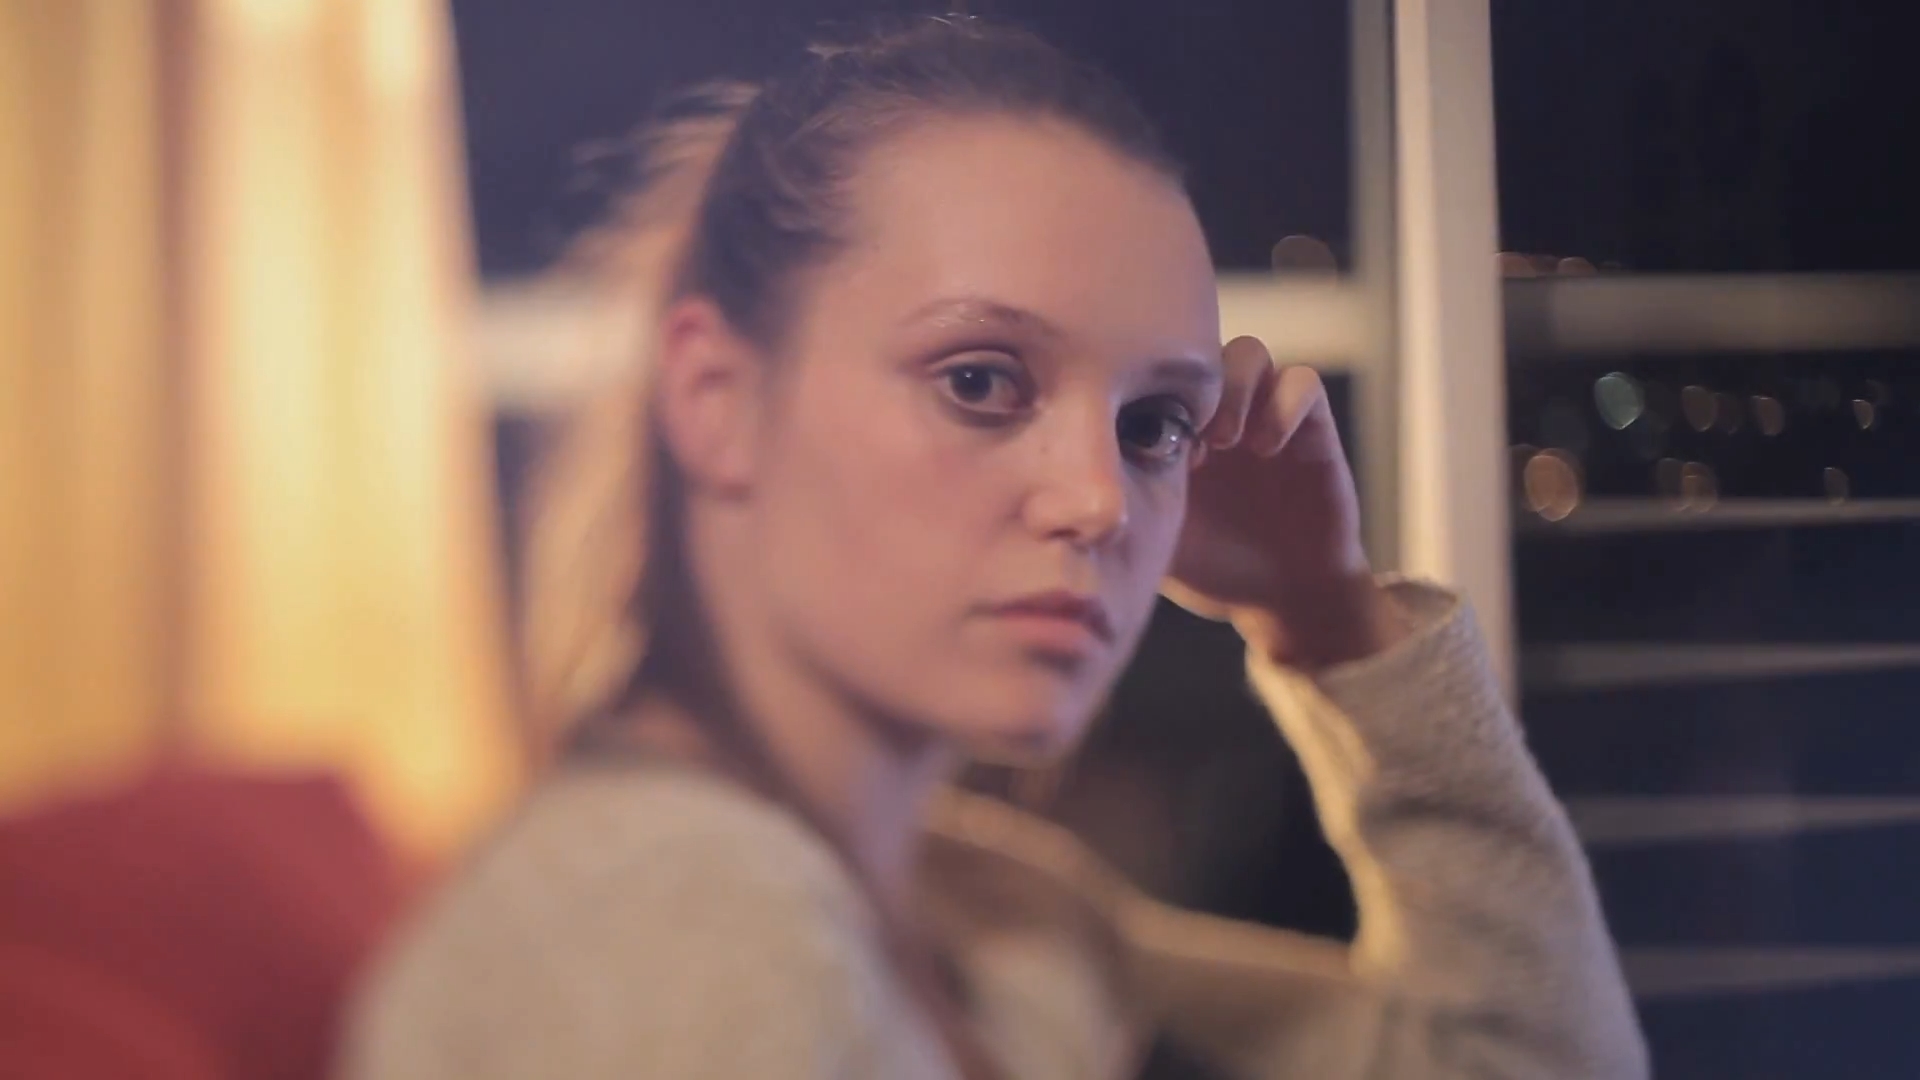 Still from 1 minute Student film: 'I'm sorry I hurt you' - Written and Directed by Frankie Stromberg